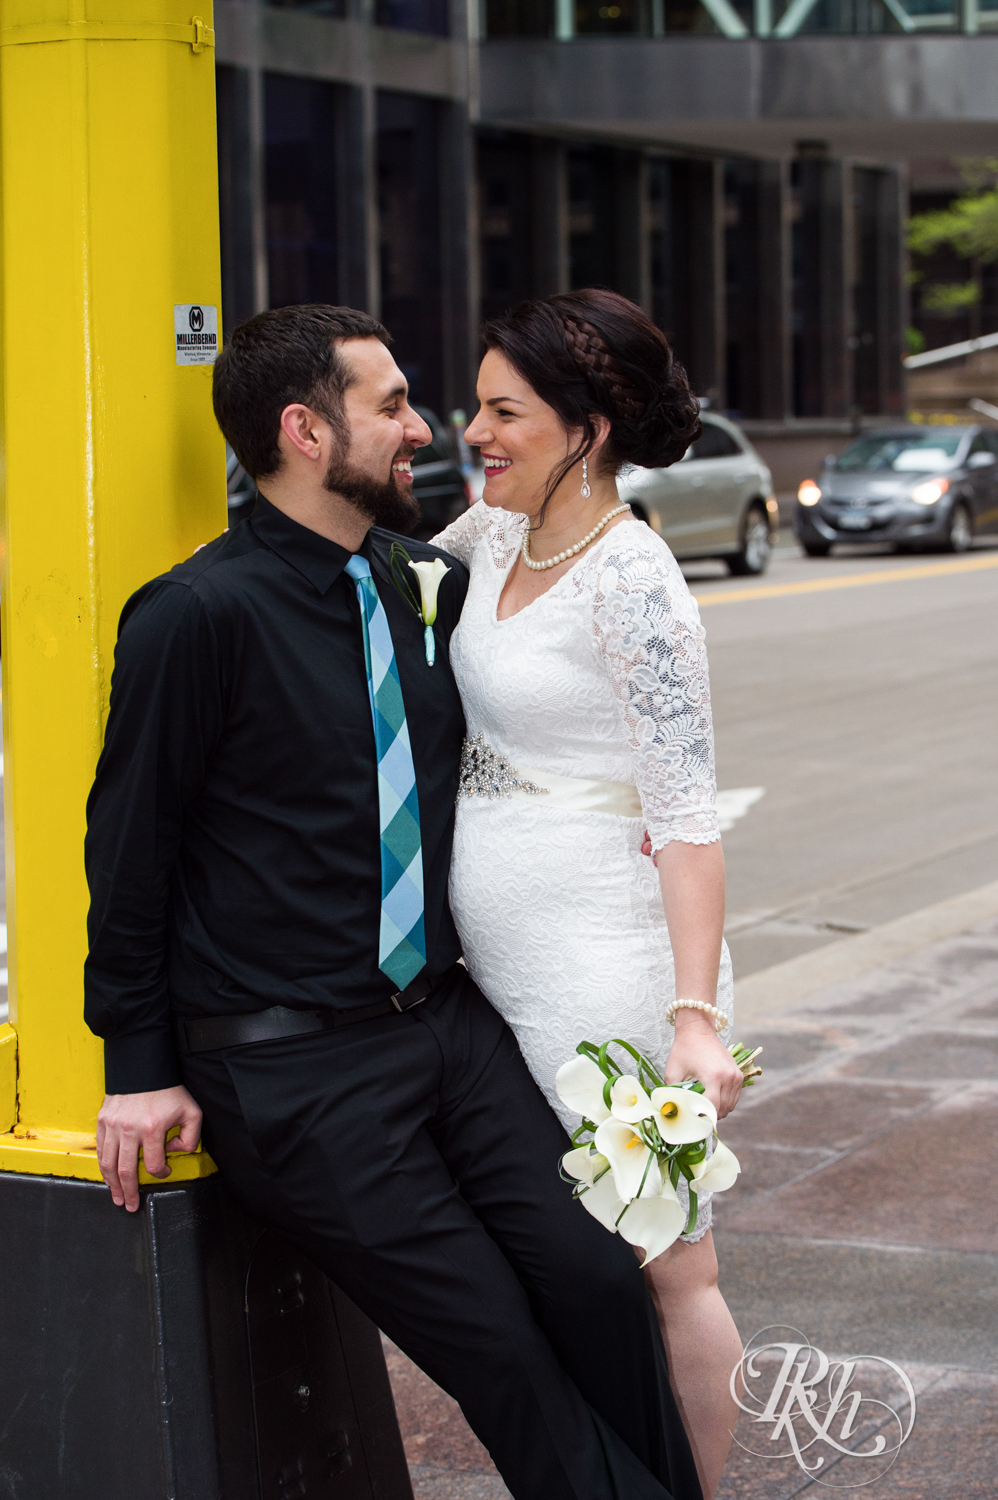 Bride and groom smile in Minneapolis, Minnesota before their courthouse wedding.